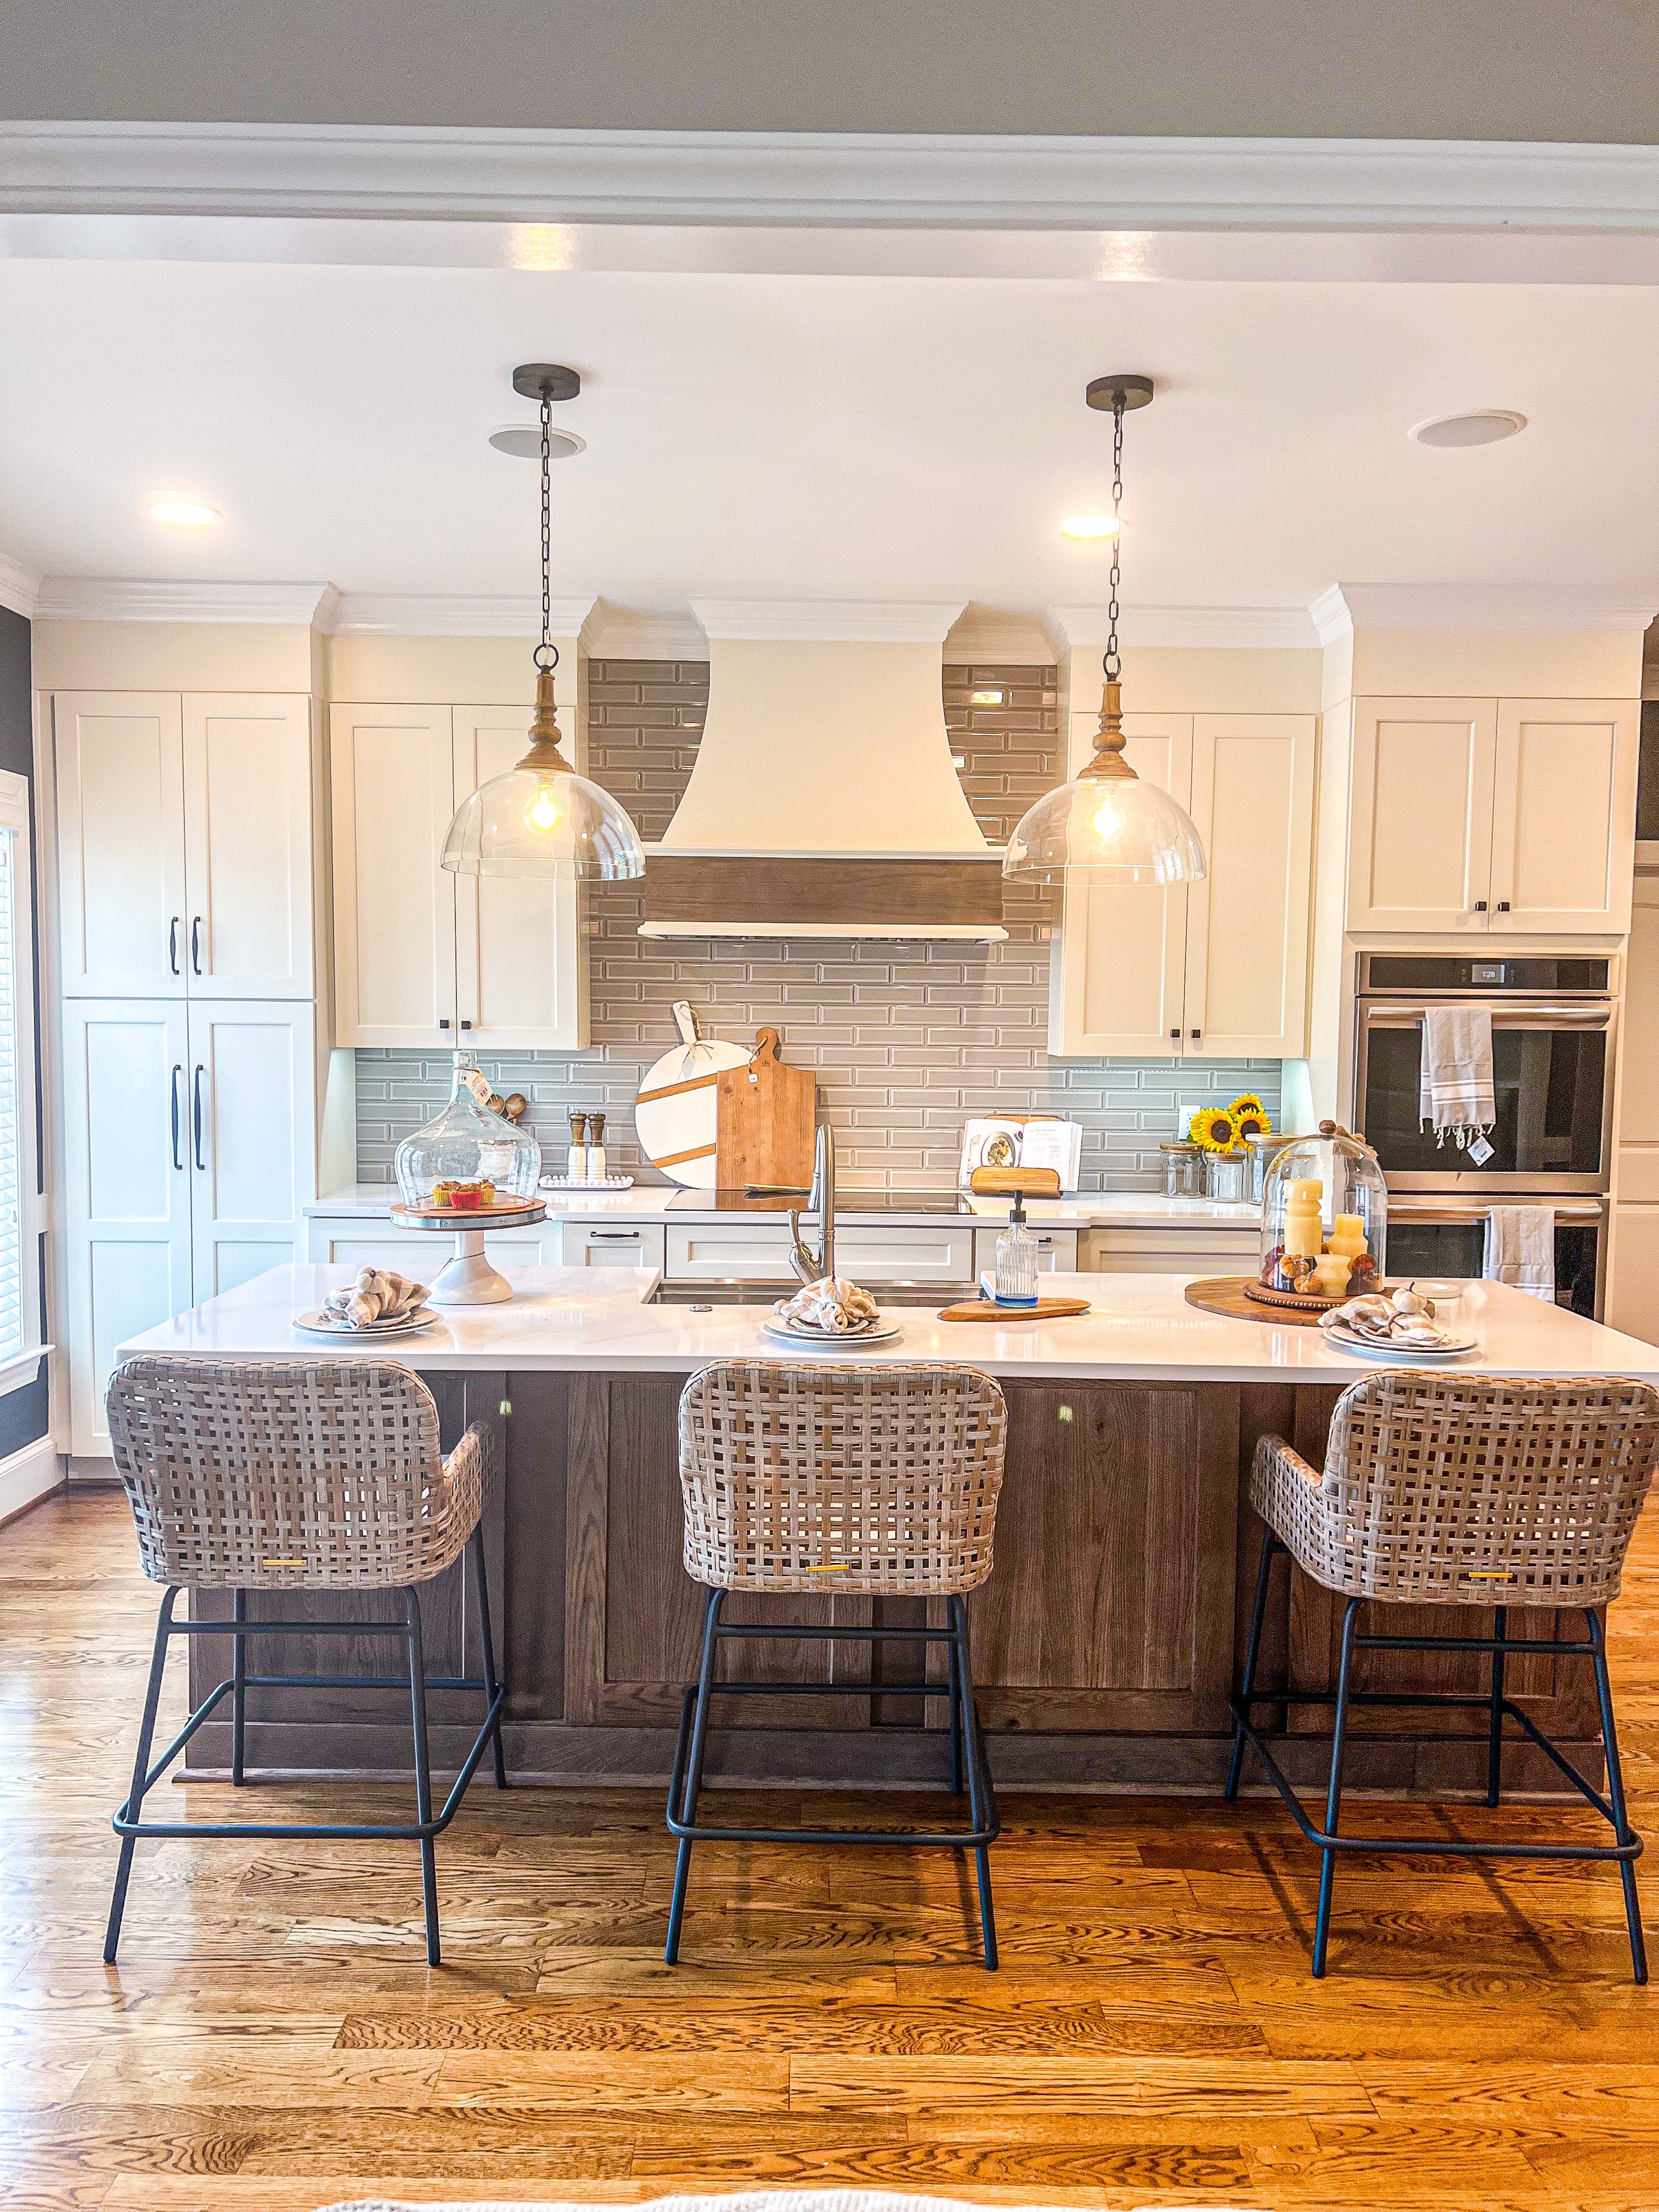 renovated kitchen with rattan bar chairs, modern lighting pendants, white cabinets